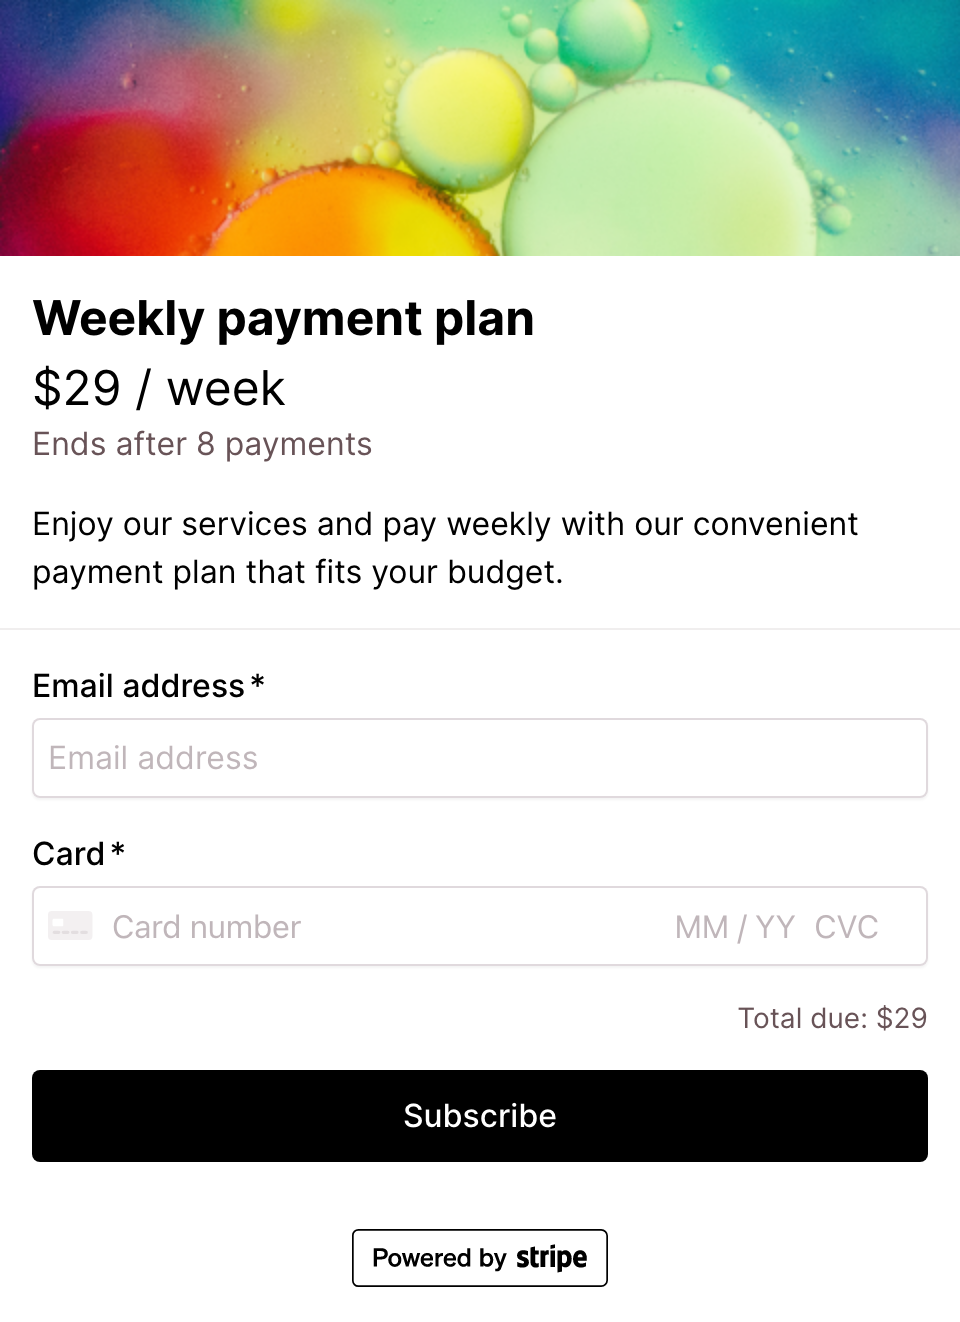 Weekly payment plan checkout form